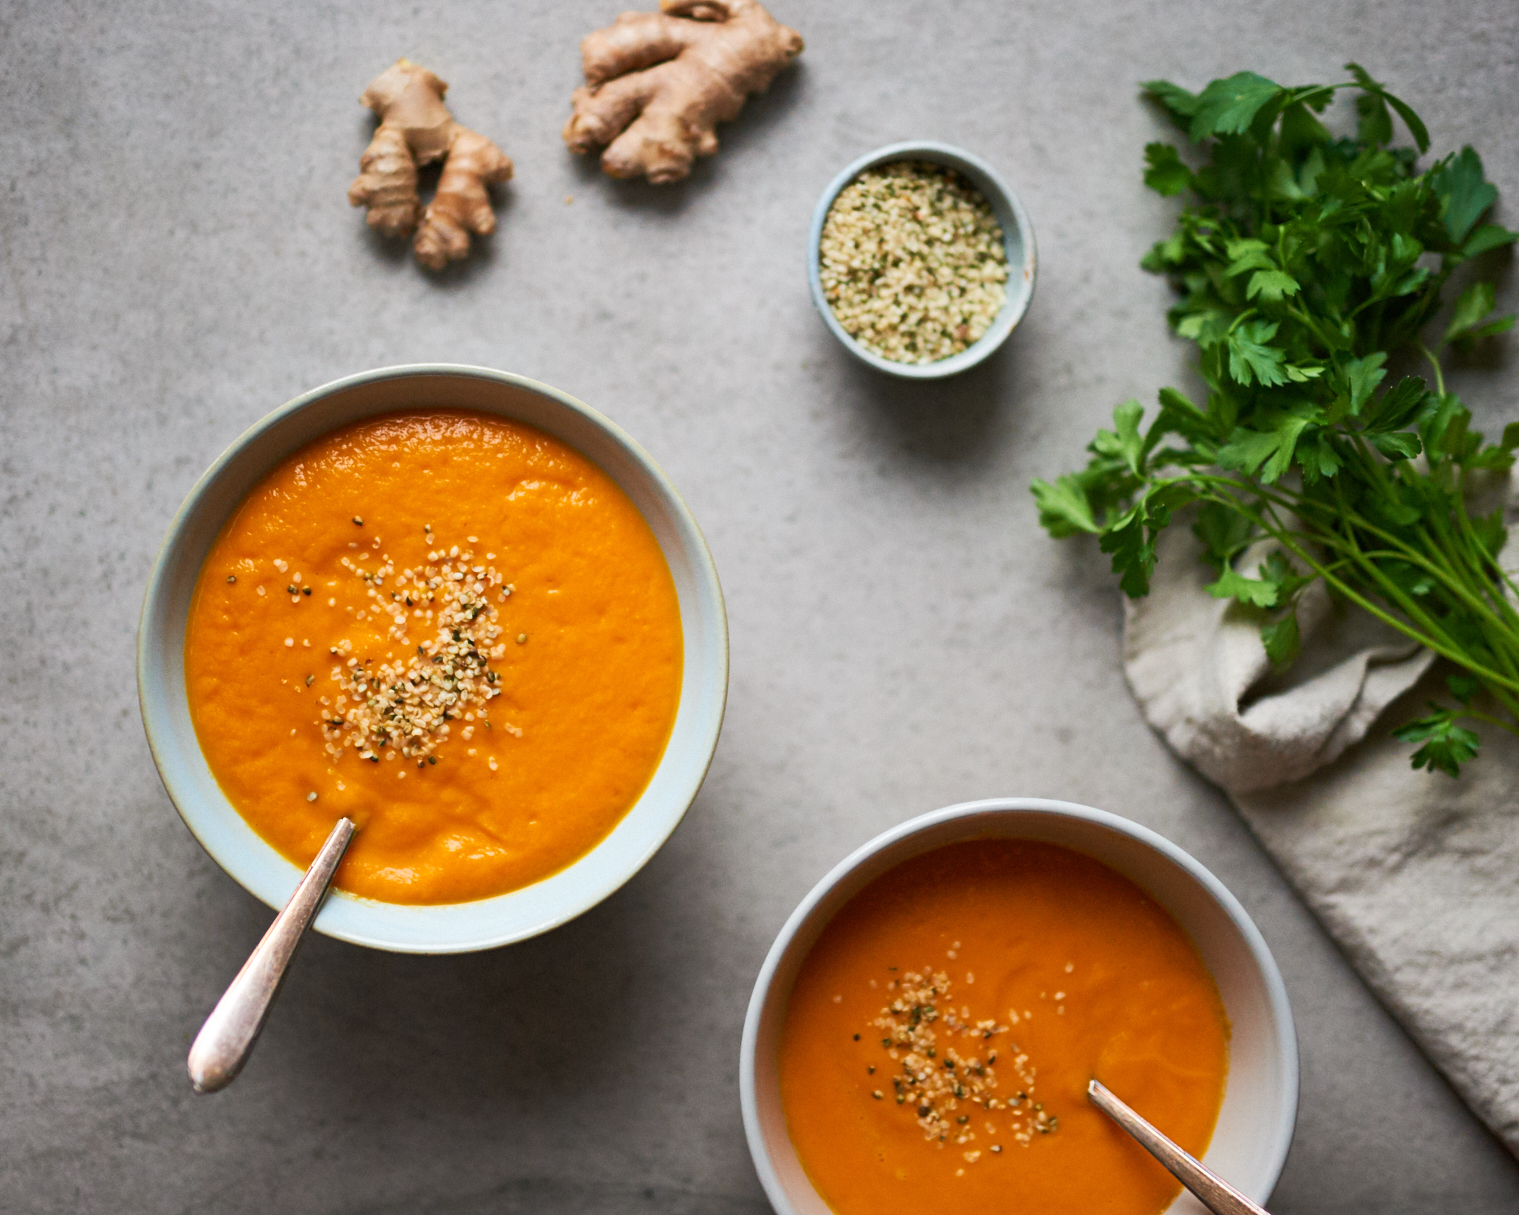 This squash ginger soup recipe is vegan and gluten free but still creamy and blended.